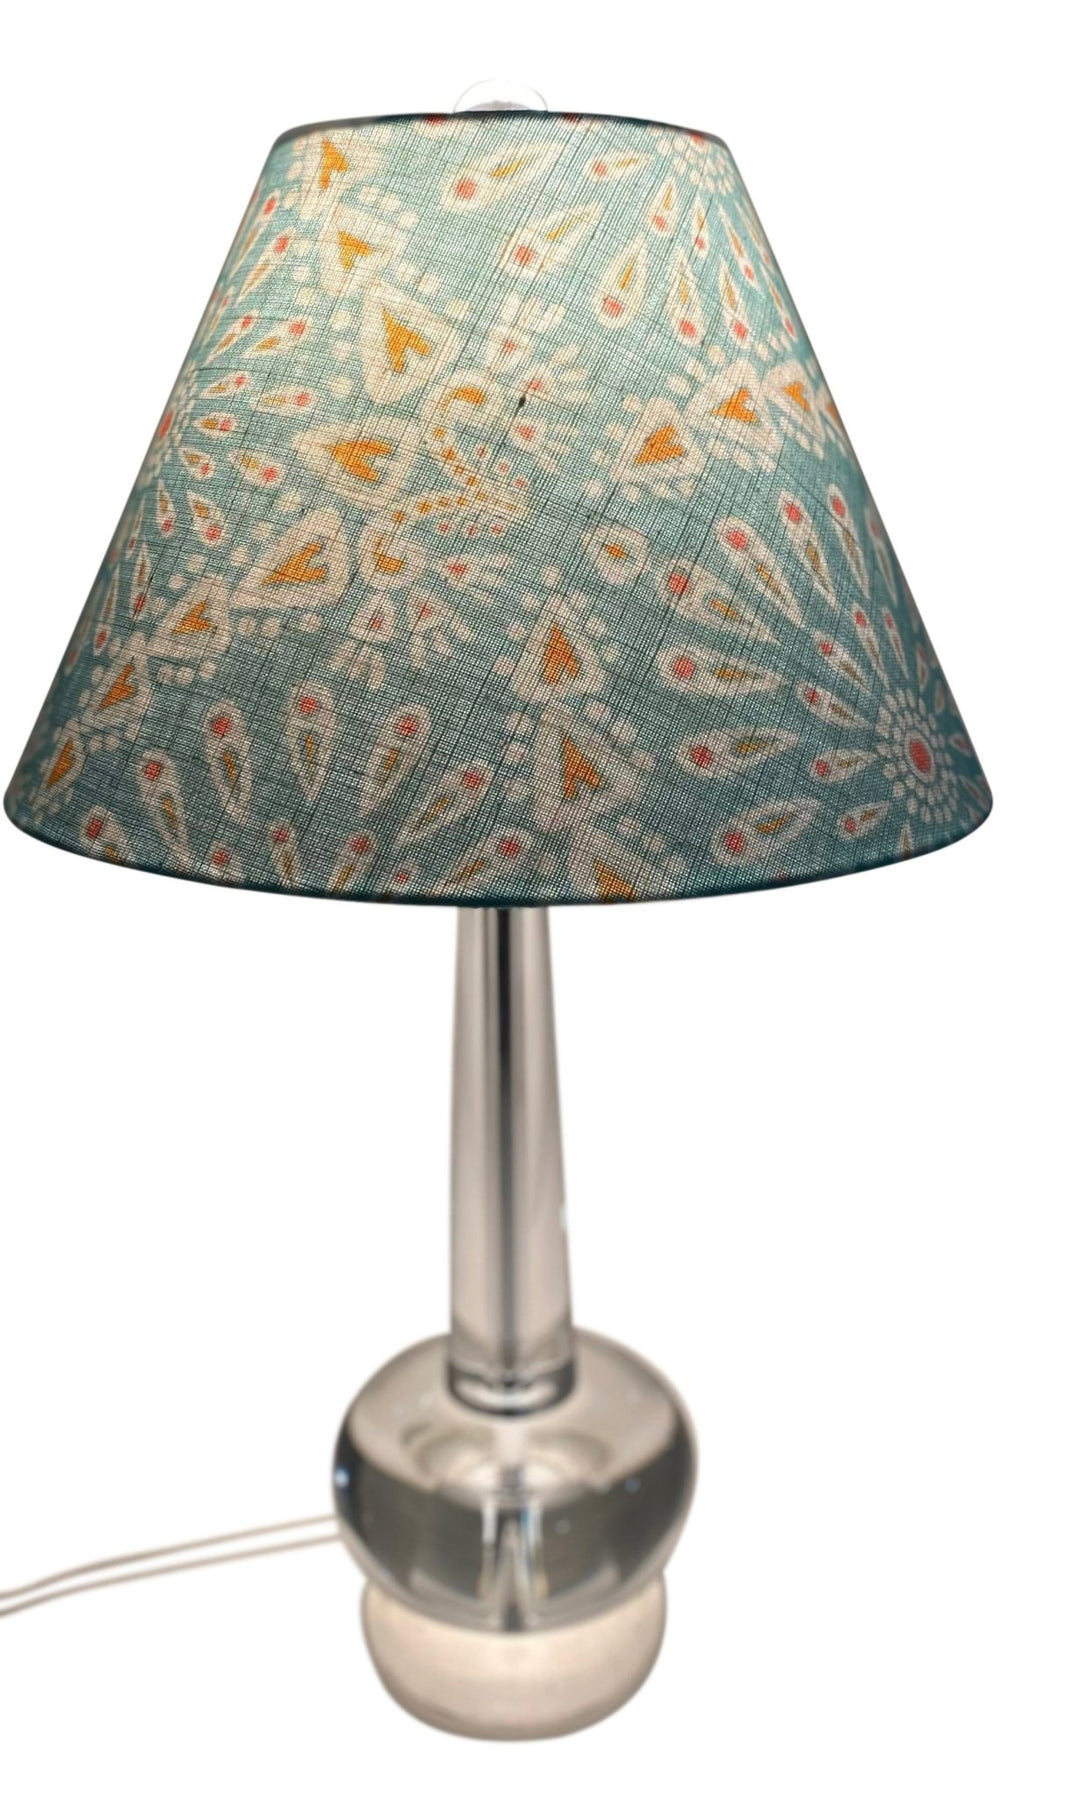 Empire Hardback Shade made with ANY Spoonflower Belgian linen - MADE TO ORDER - Ships in 3 weeks! - Lux Lamp Shades